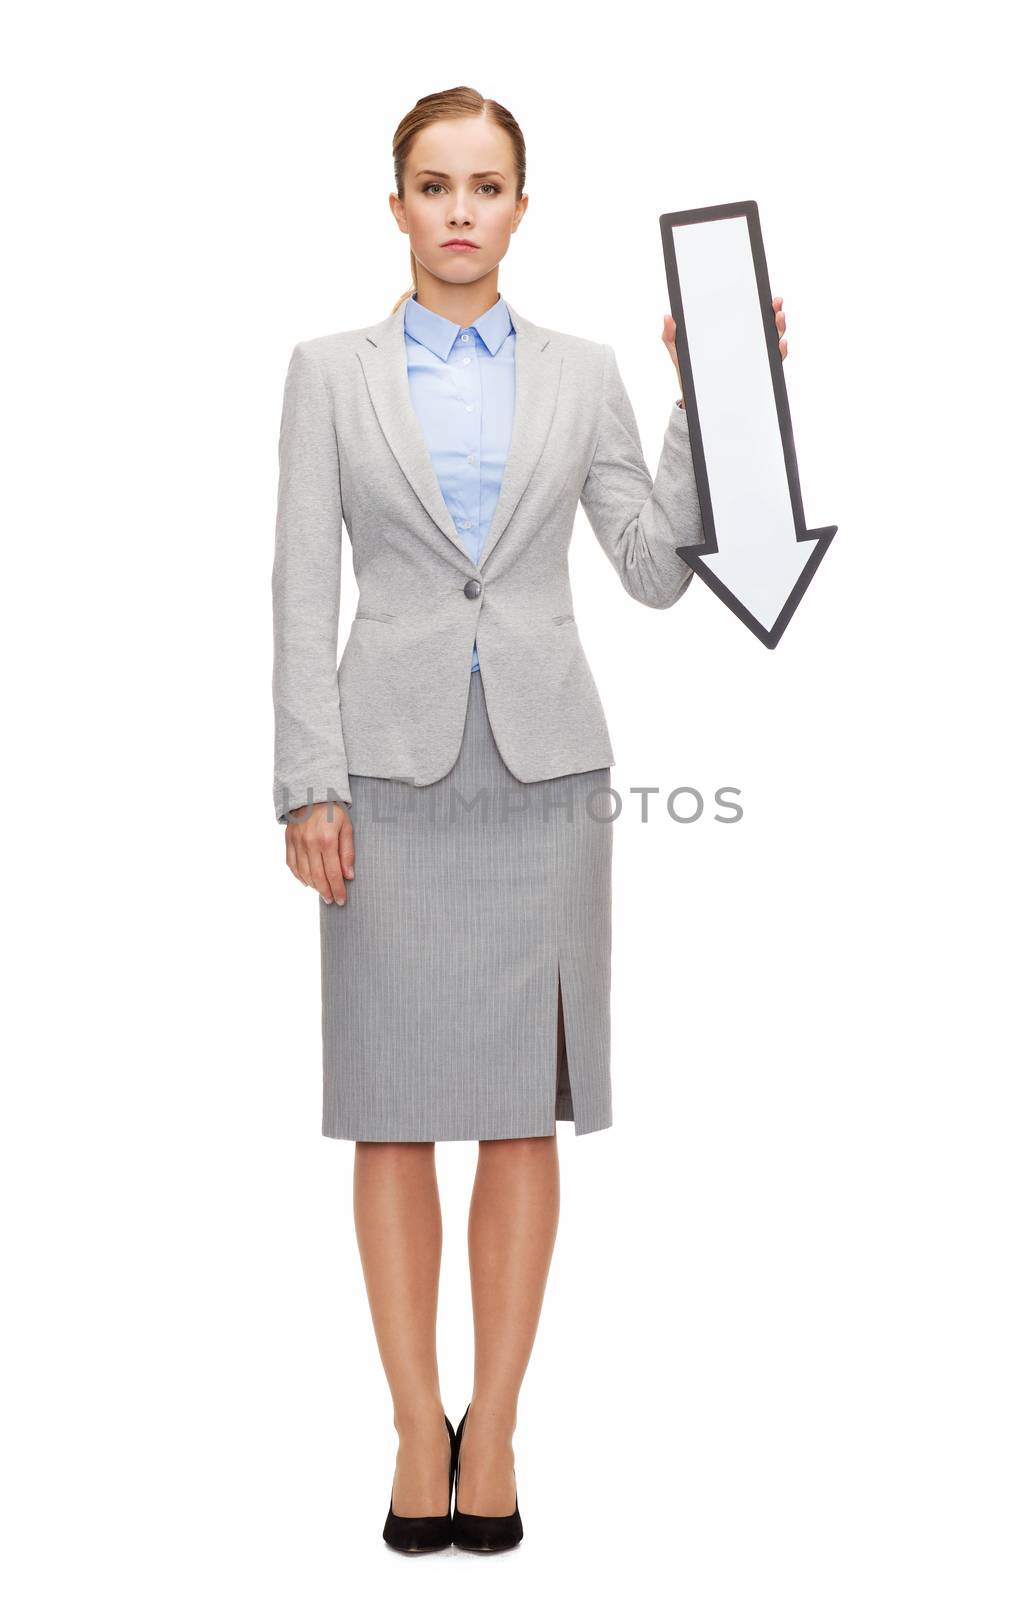 business and education concept - serious businesswoman with direction arrow sign